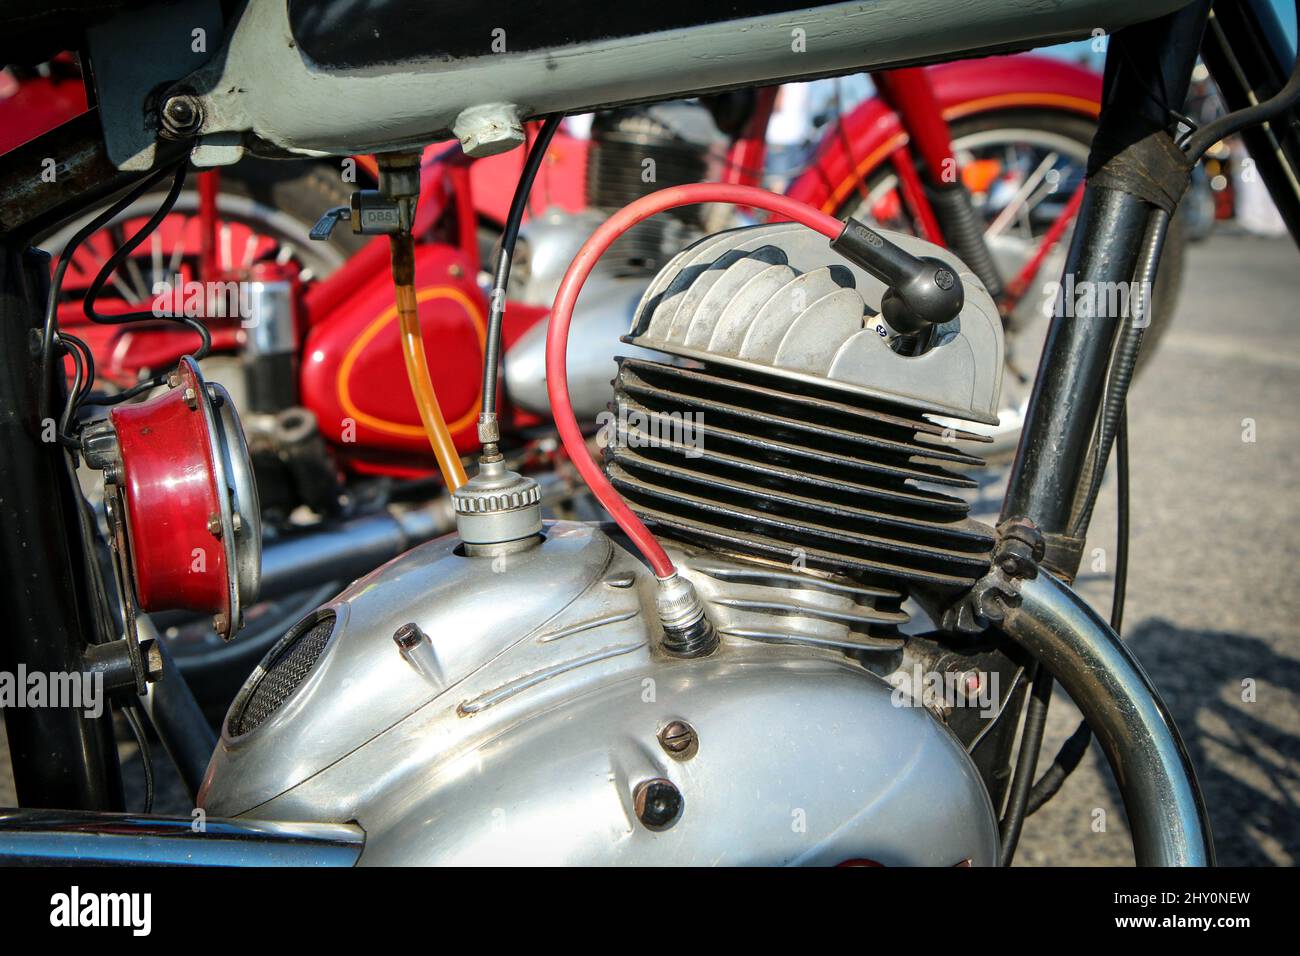 The detail of the polished old motorbike with the two stroke engine. The head has ribbing and is air cooled. Stock Photo